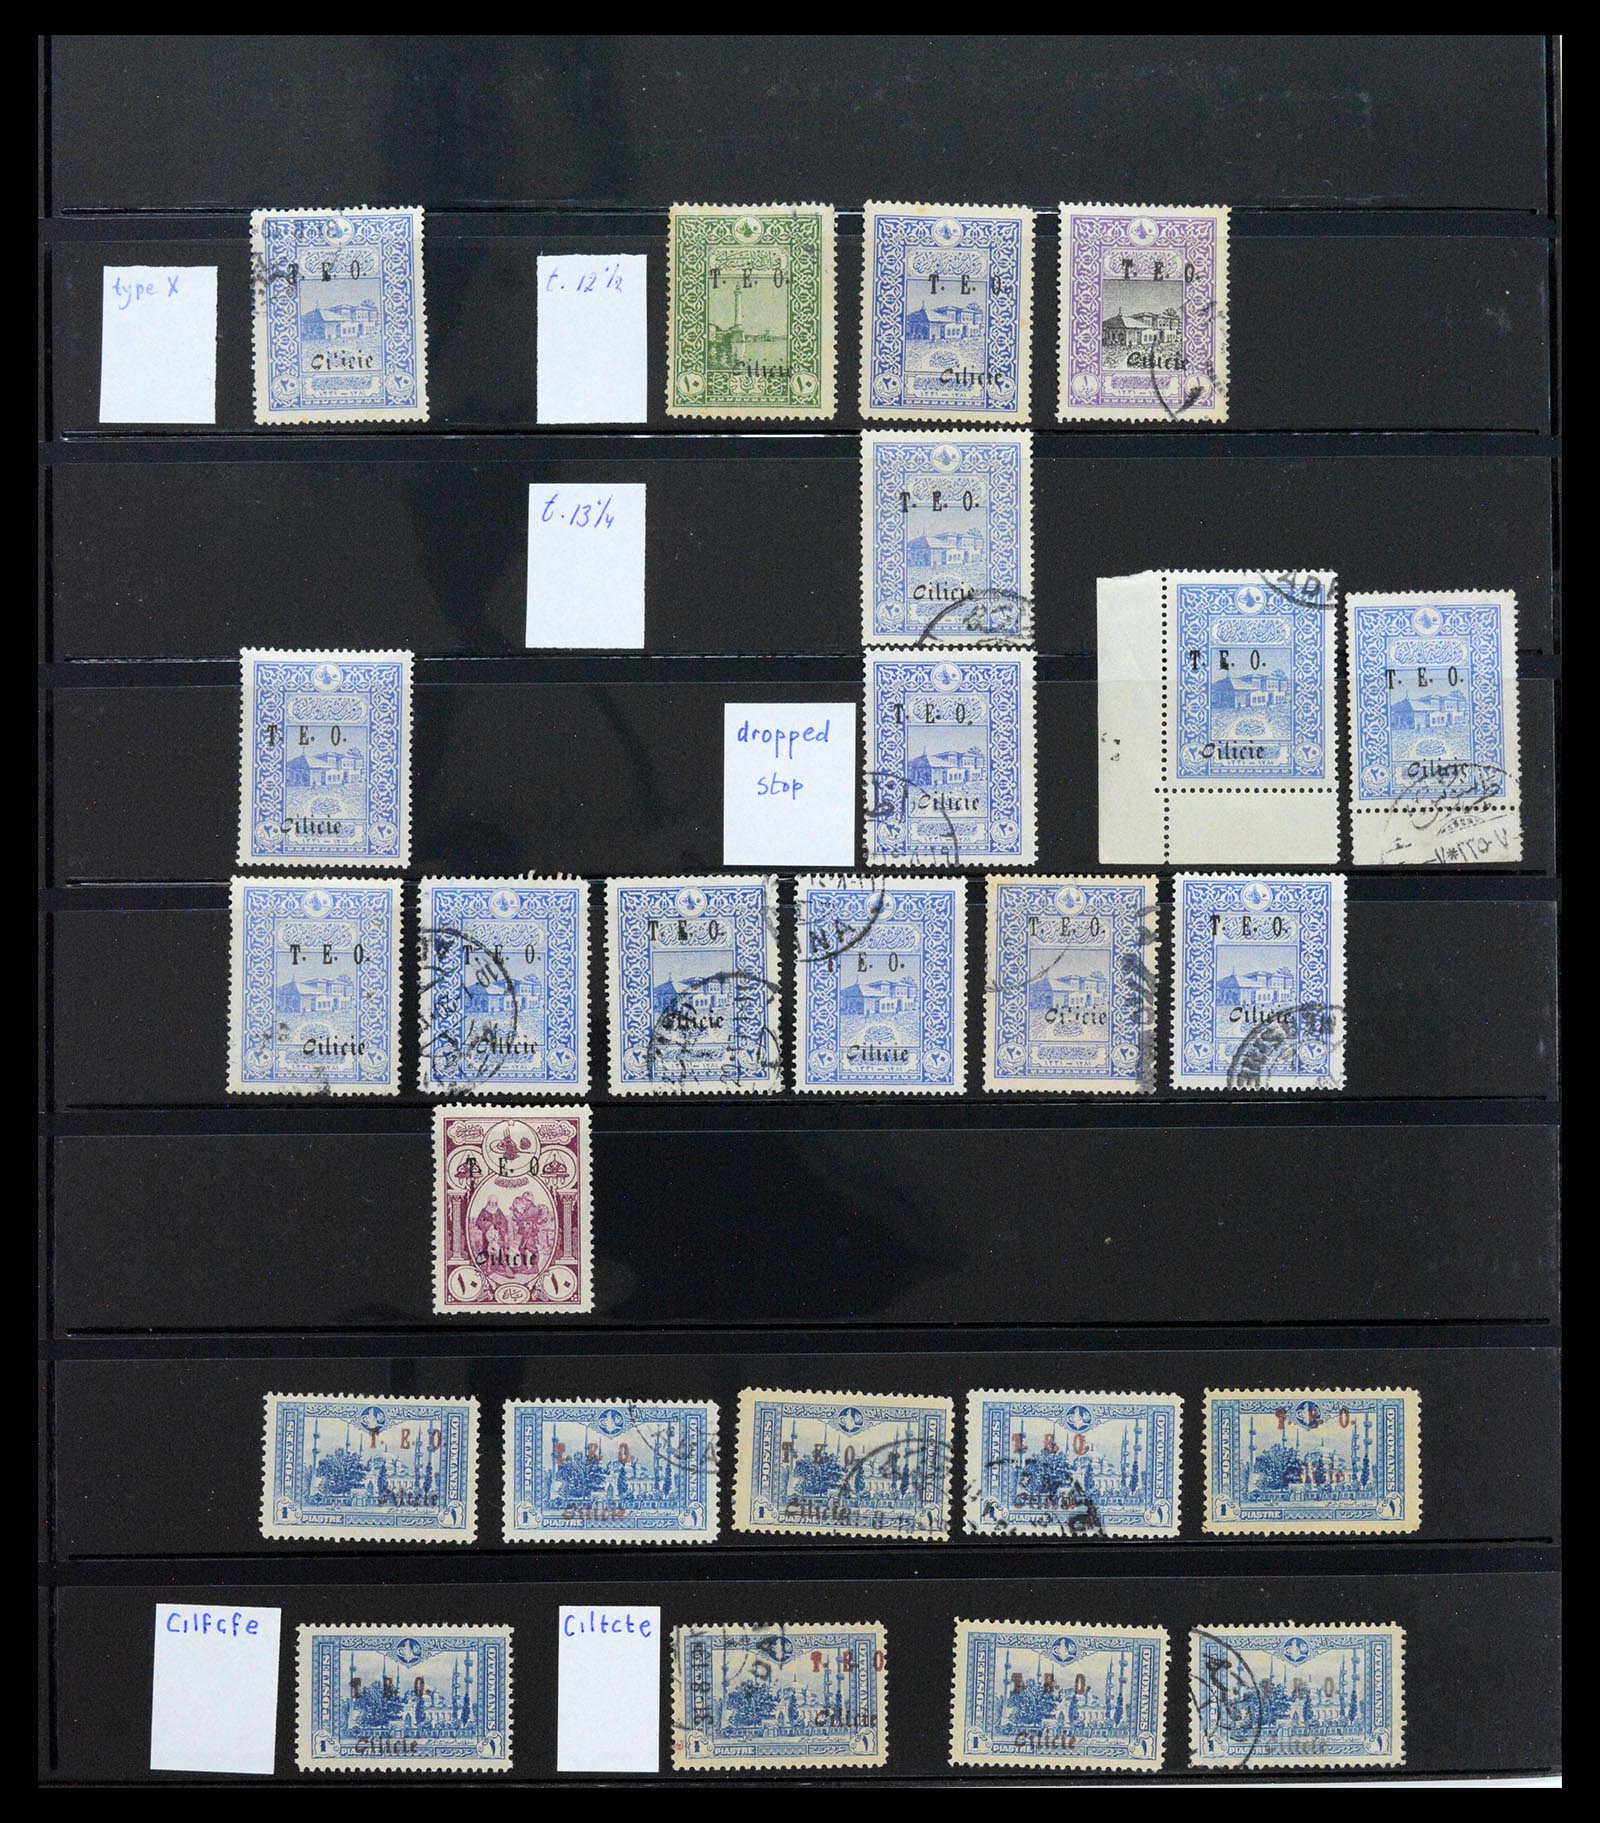 39457 0008 - Stamp collection 39457 Cilicia 1919-1921.